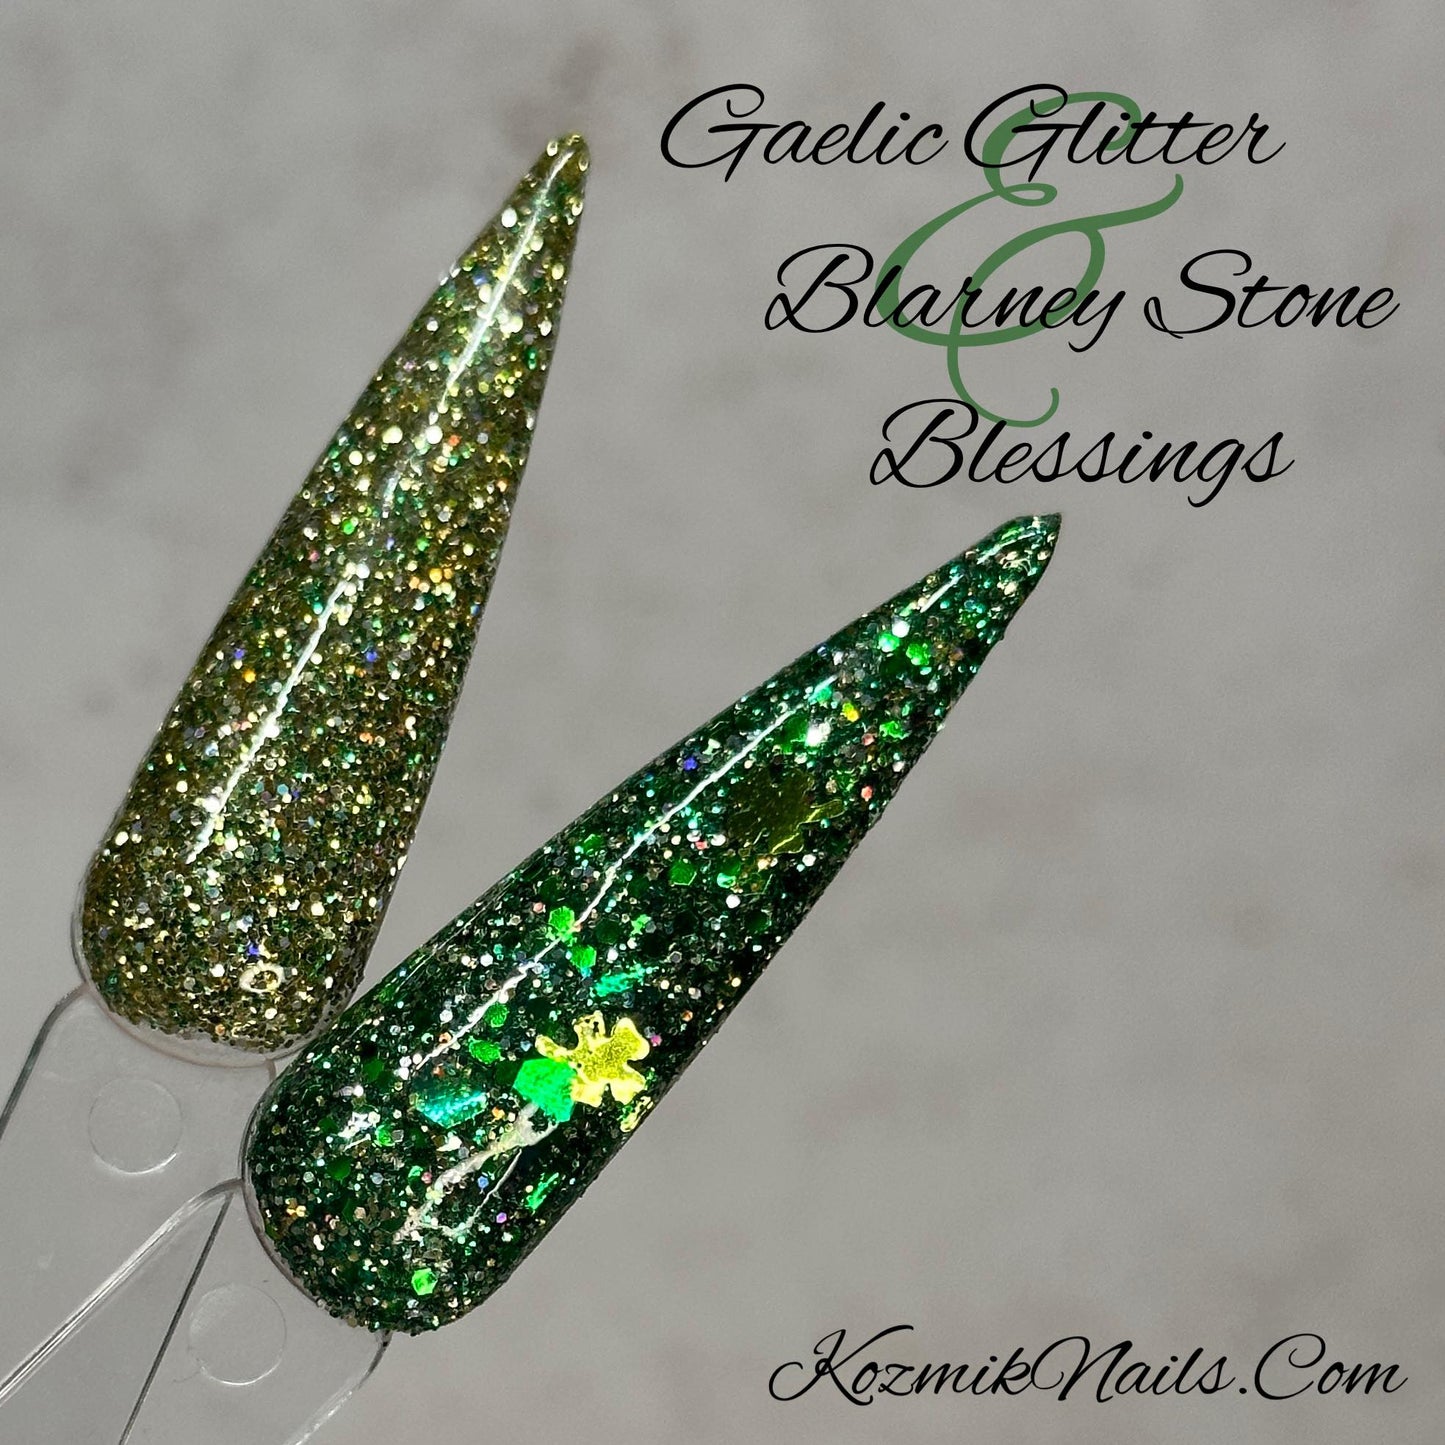 Big Bang bébé ! Offre Duo : Gaelic Glitter / Blarney Stone Blessings ! 13/02/23